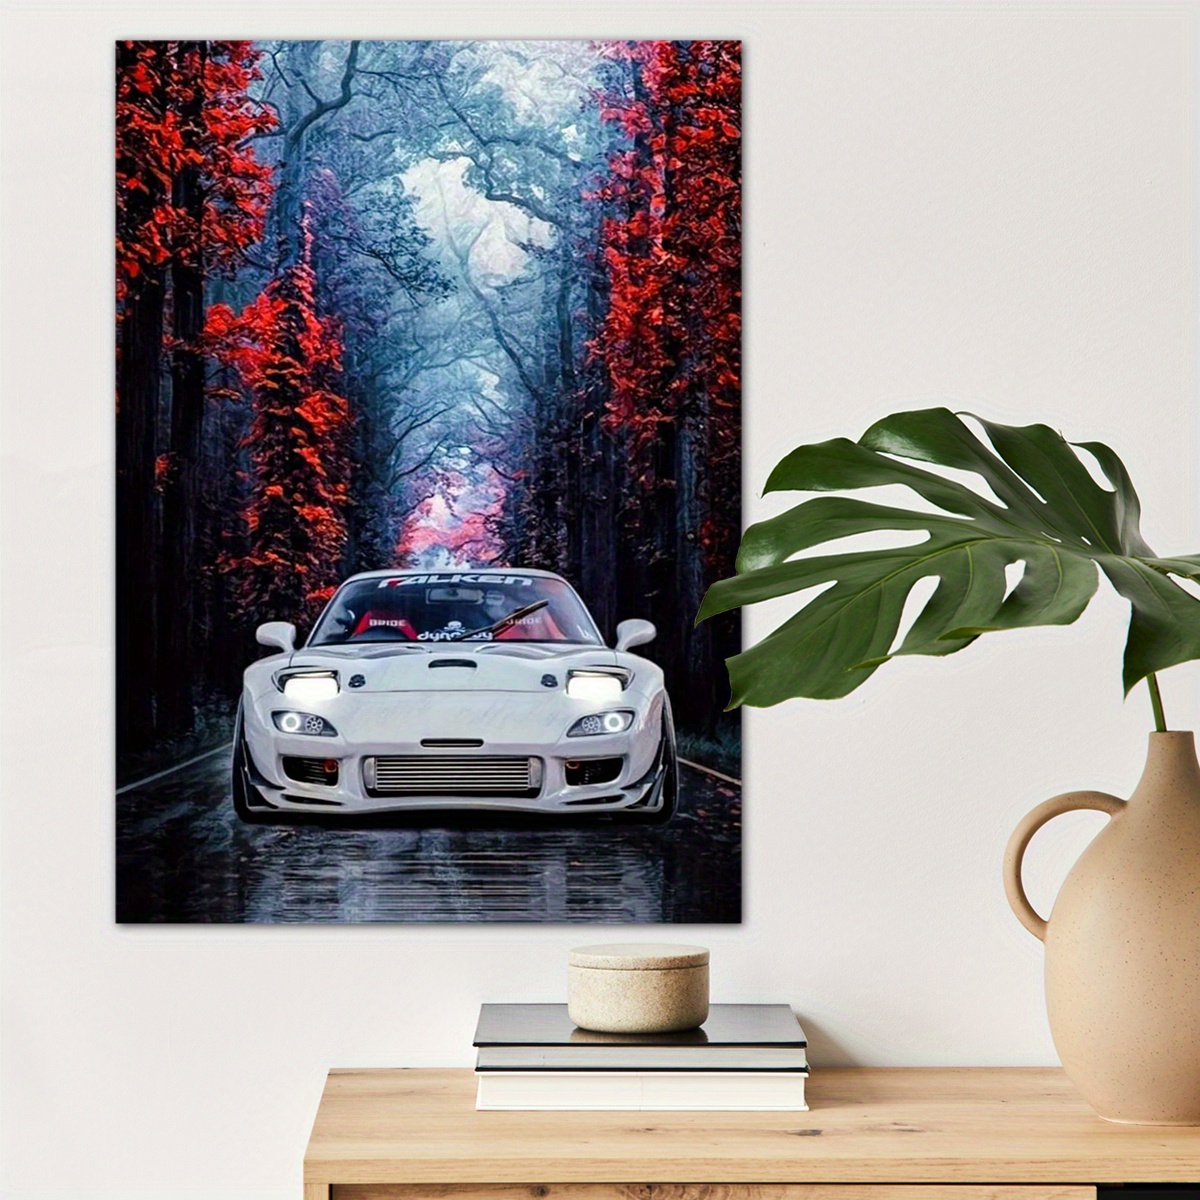 

1pc Car Poster Canvas Wall Art For Home Decor, Car Lovers And Car Enthusiasts Poster Wall Decor Roadster Canvas Prints For Living Room Bedroom Kitchen Office Cafe Decor, Perfect Gift And Decoration